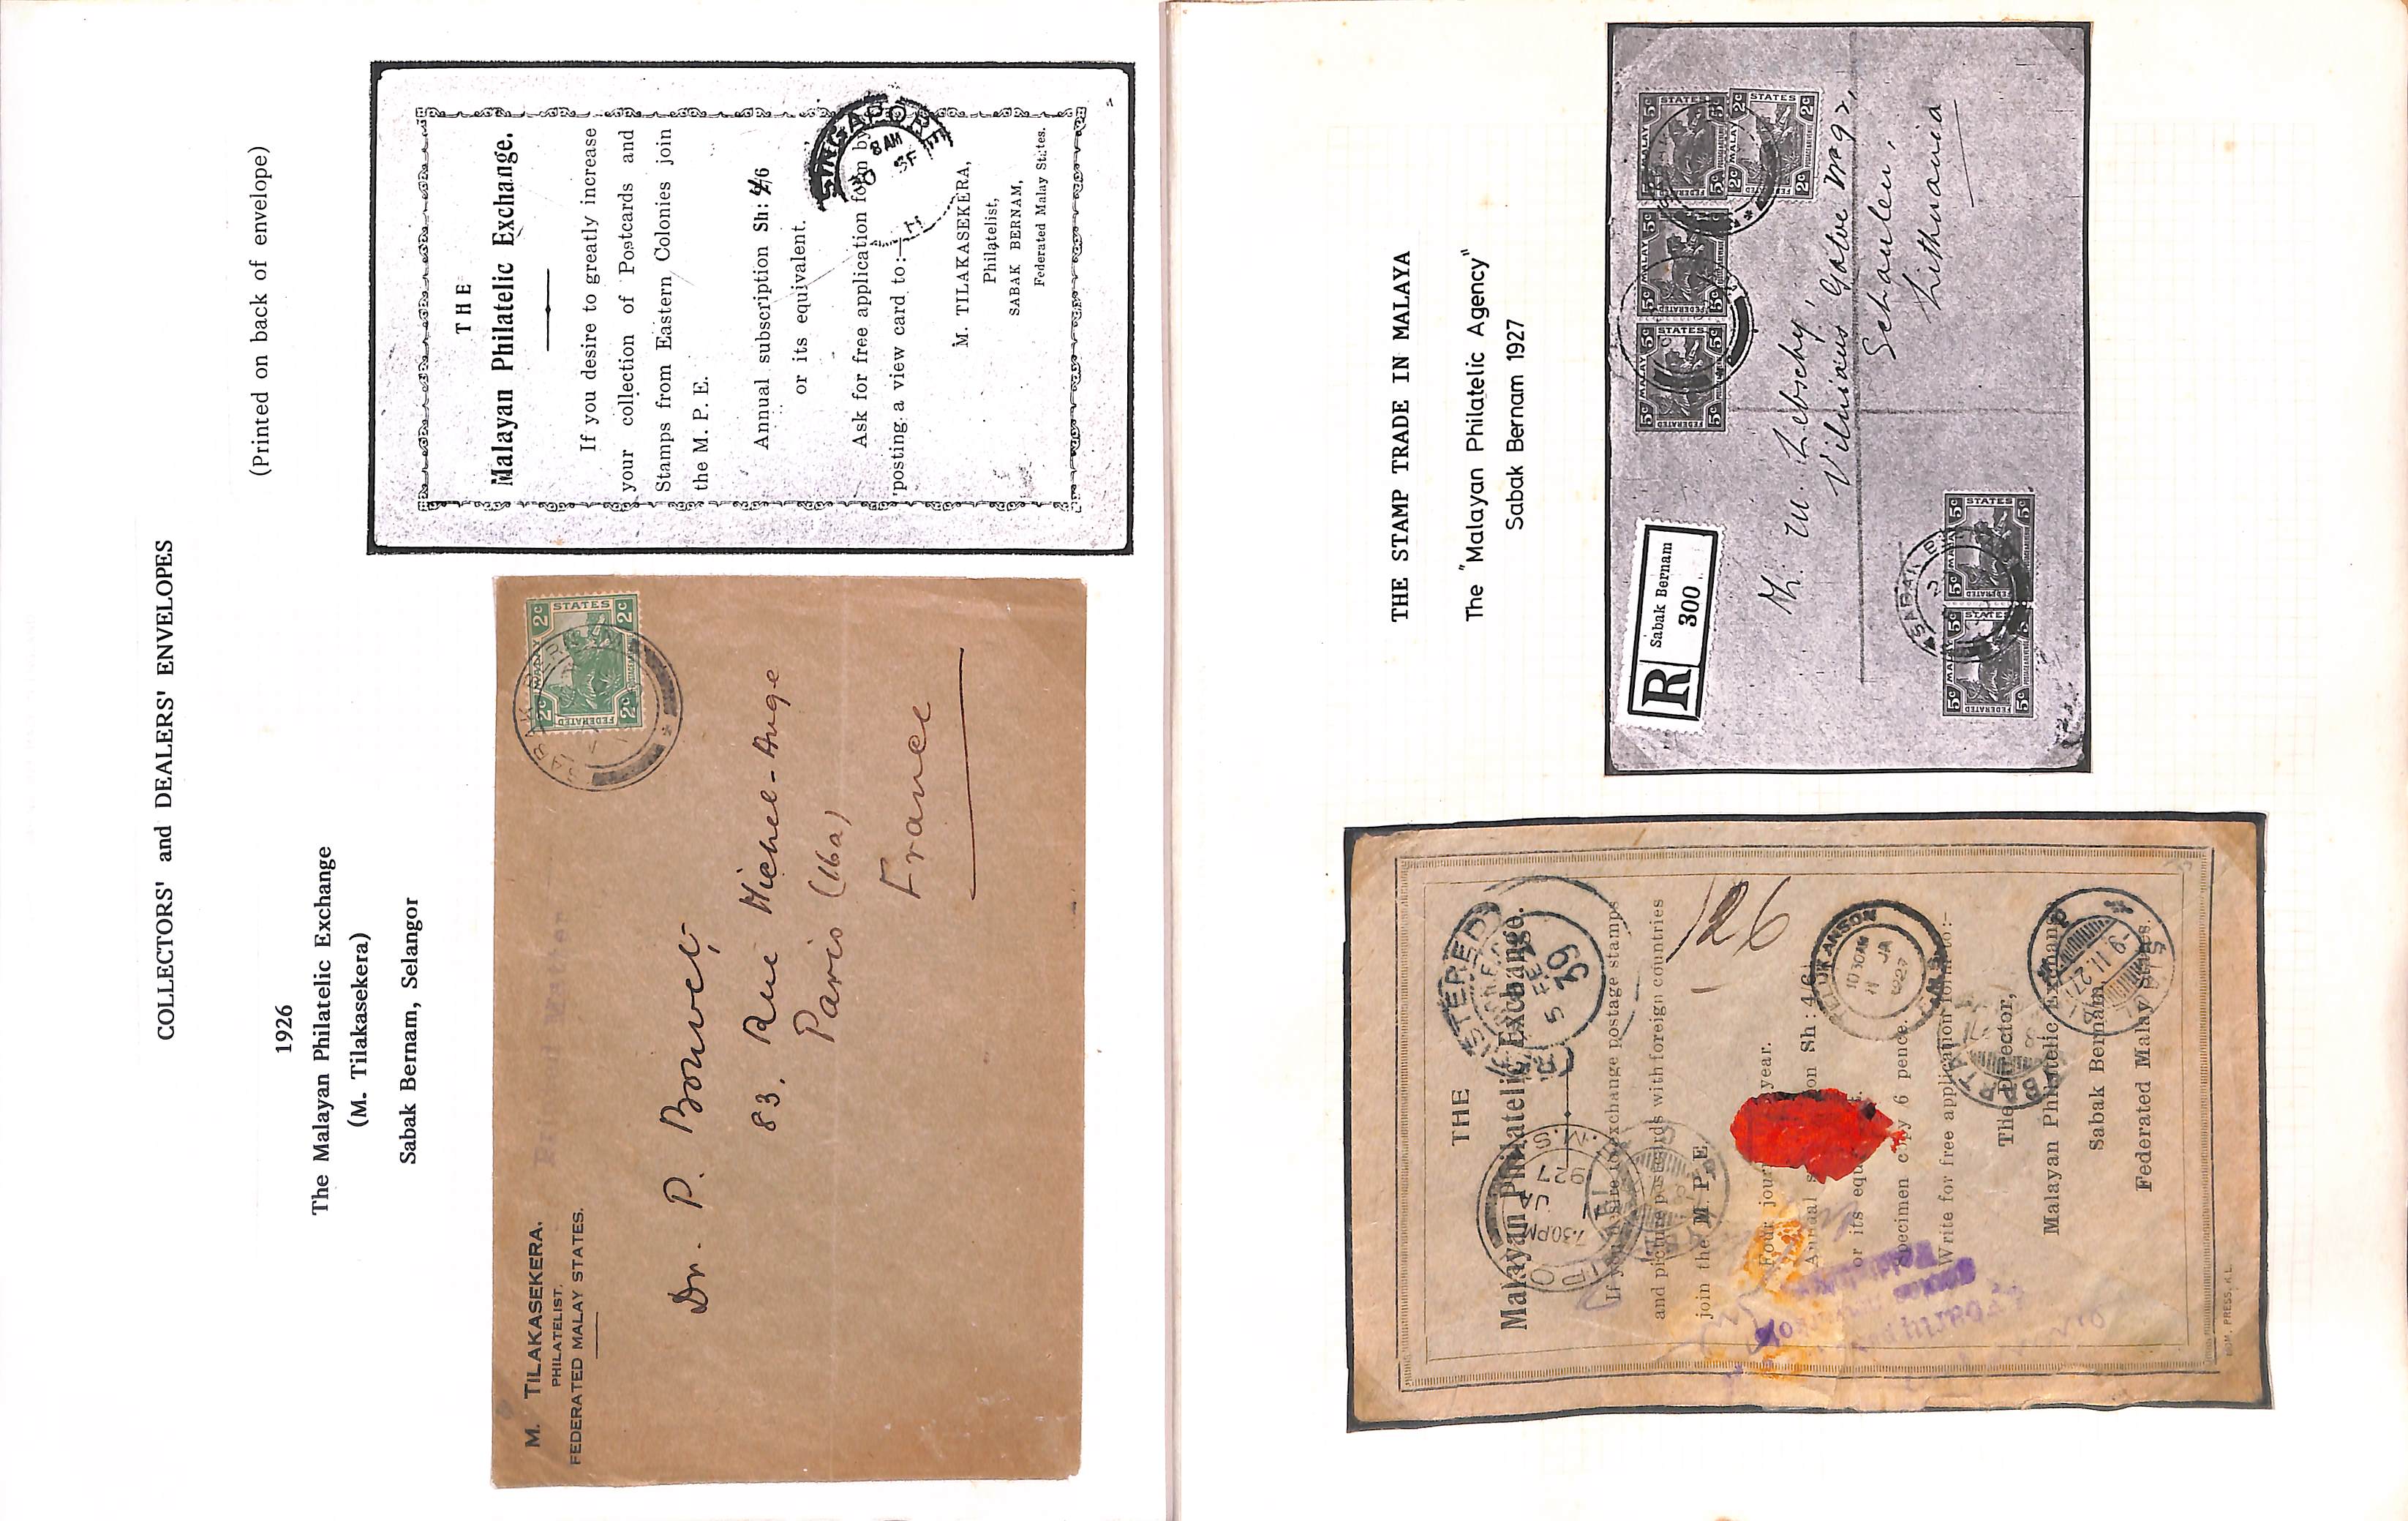 Stamp Trade. 1896-1980 Covers, cards and ephemera relating to stamp dealers and the stamp trade in